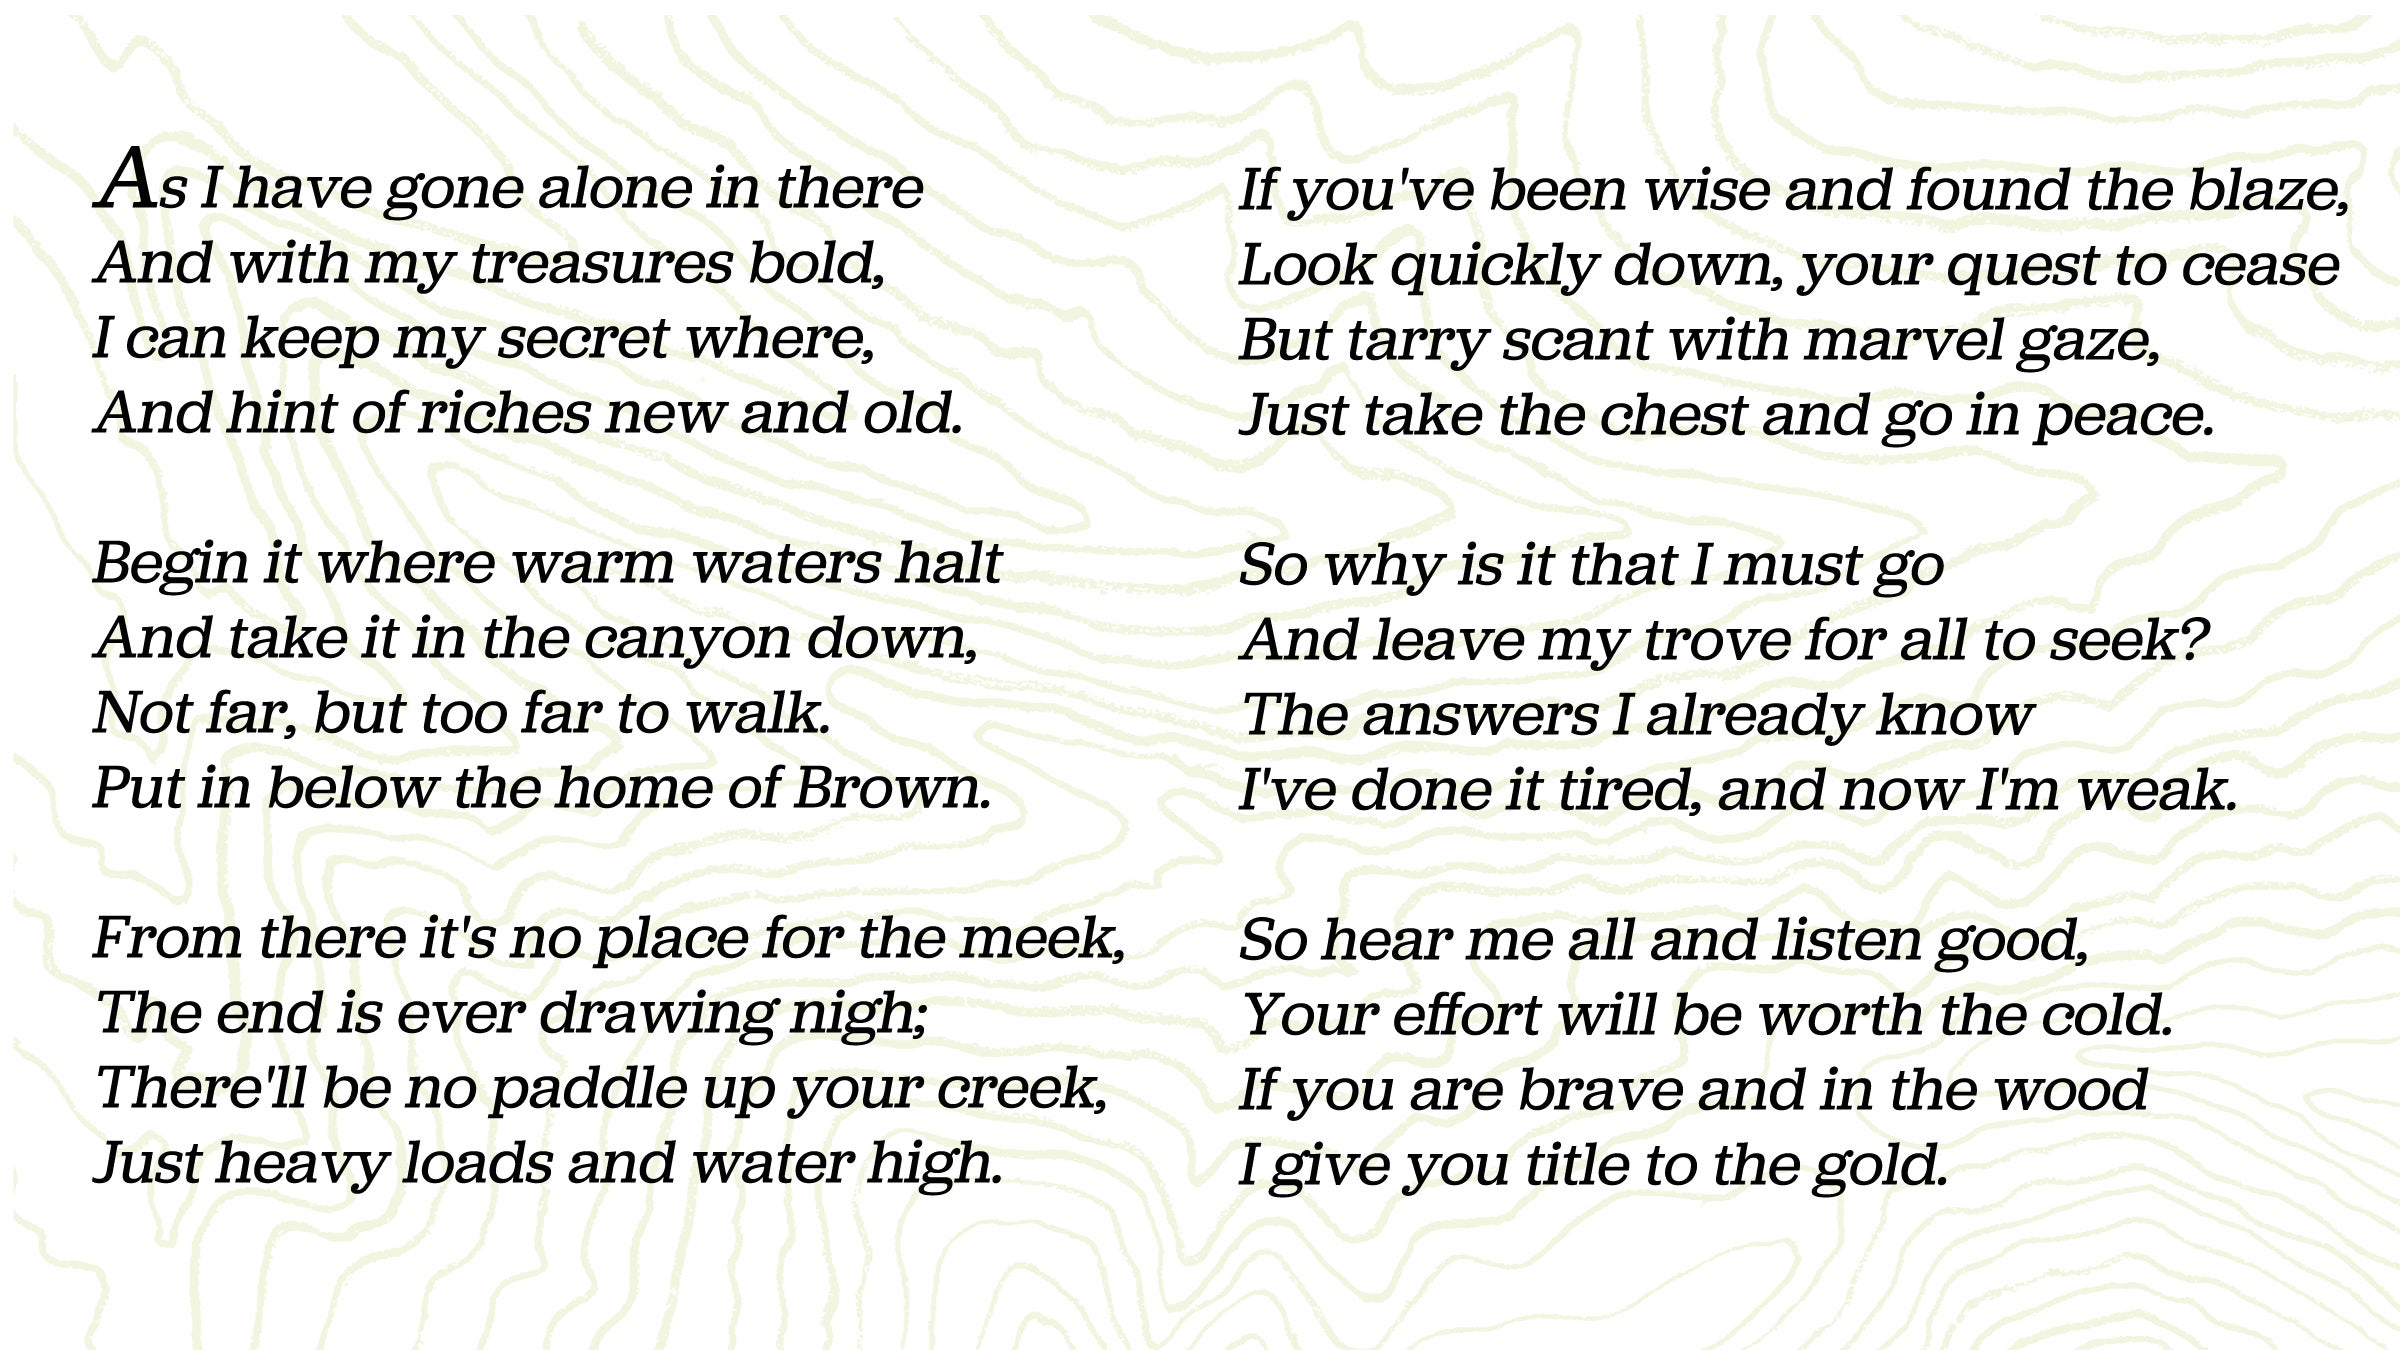 The poem, published in Fenn's 2010 memoir, "The Thrill of the Chase."